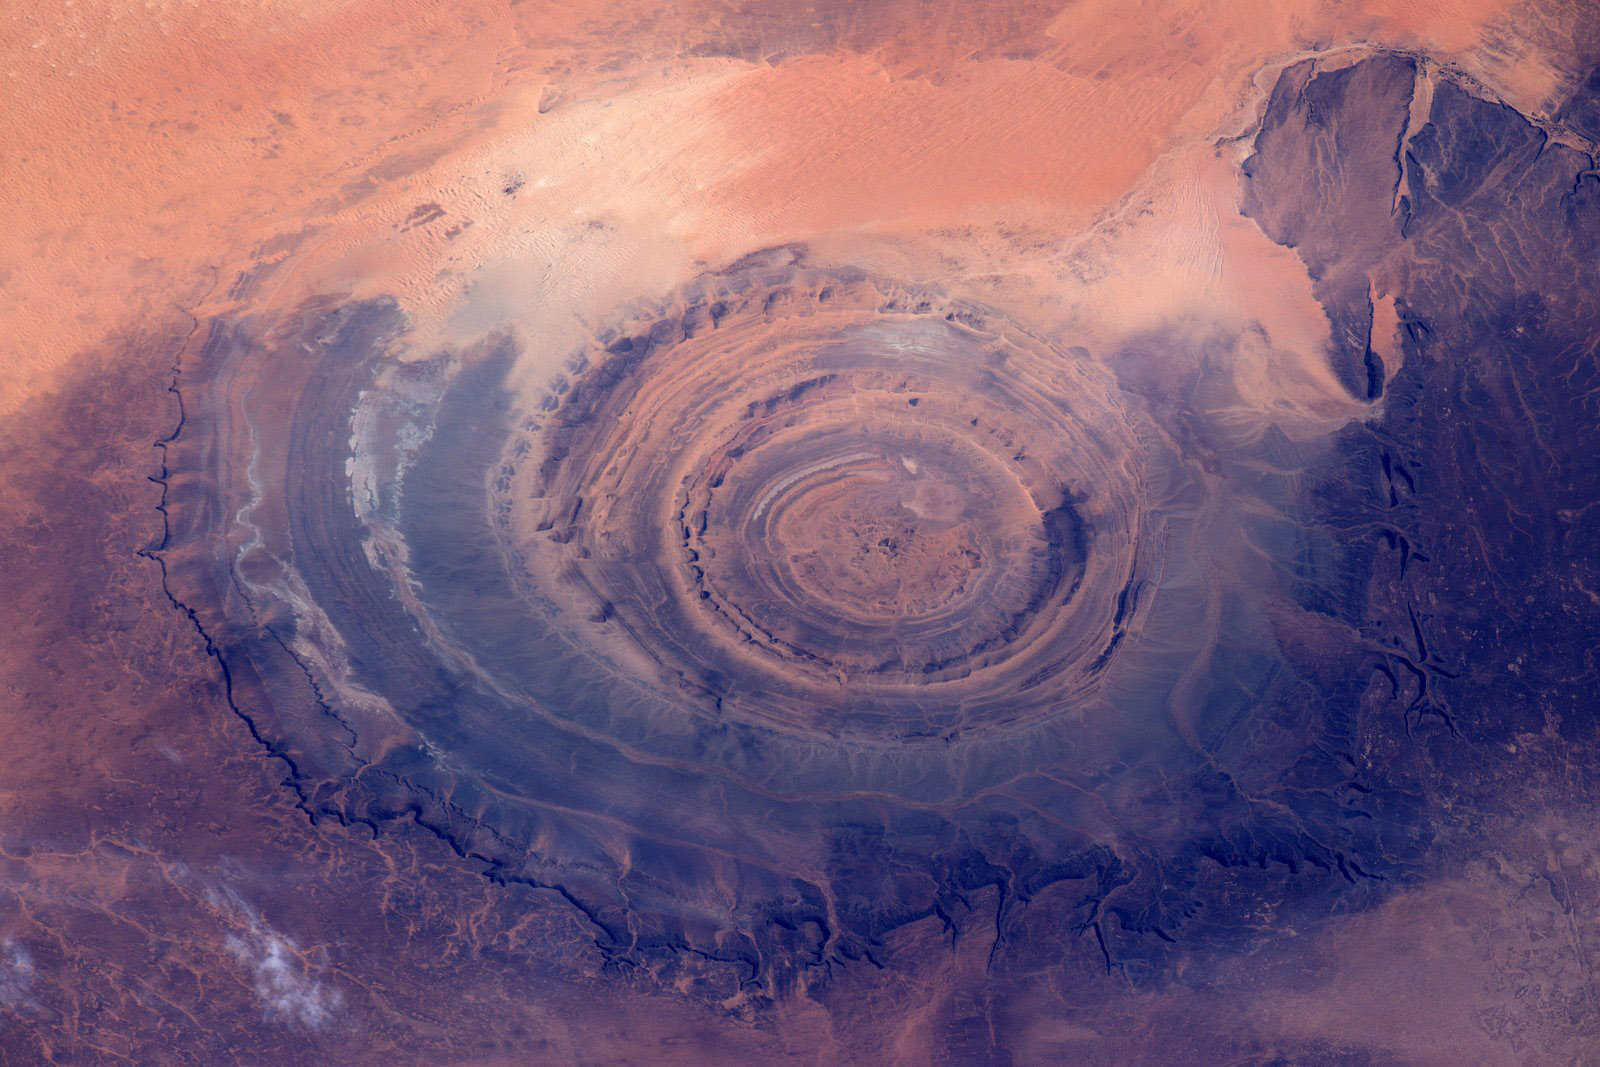 The Richat Structure or “Bulls Eye” in Mauritania, June 30, 2016.